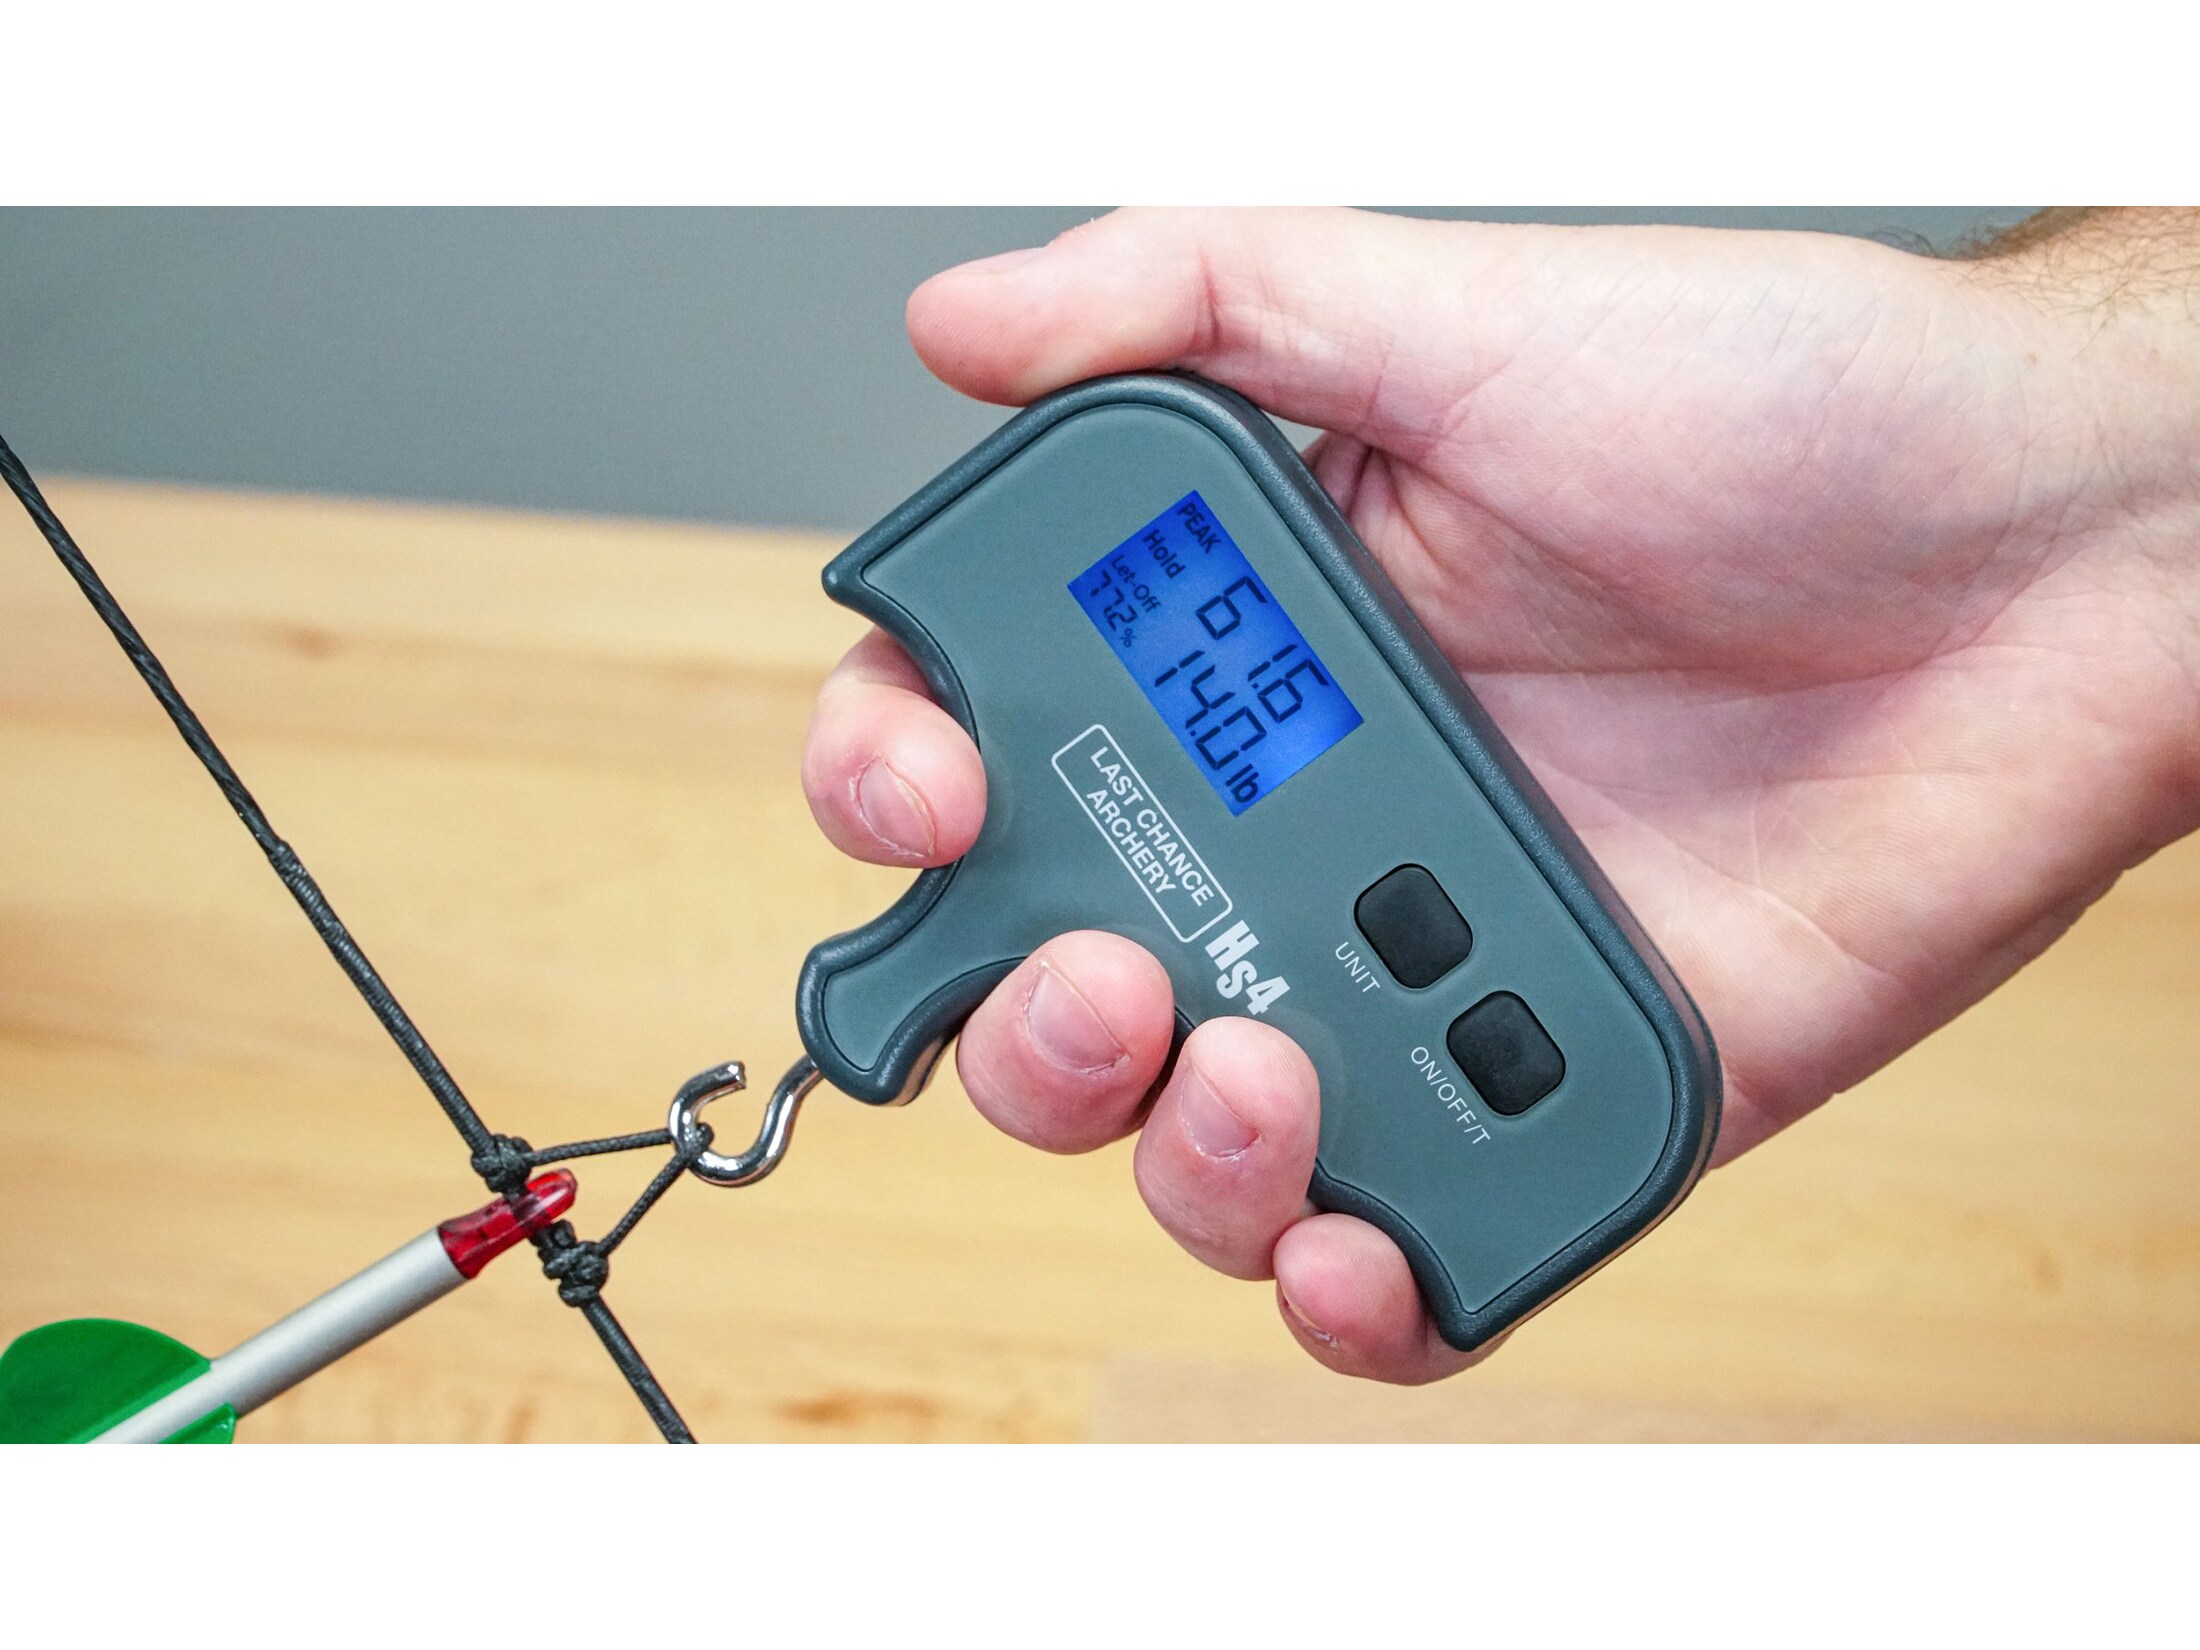 The Best Archery Bow Scale Review